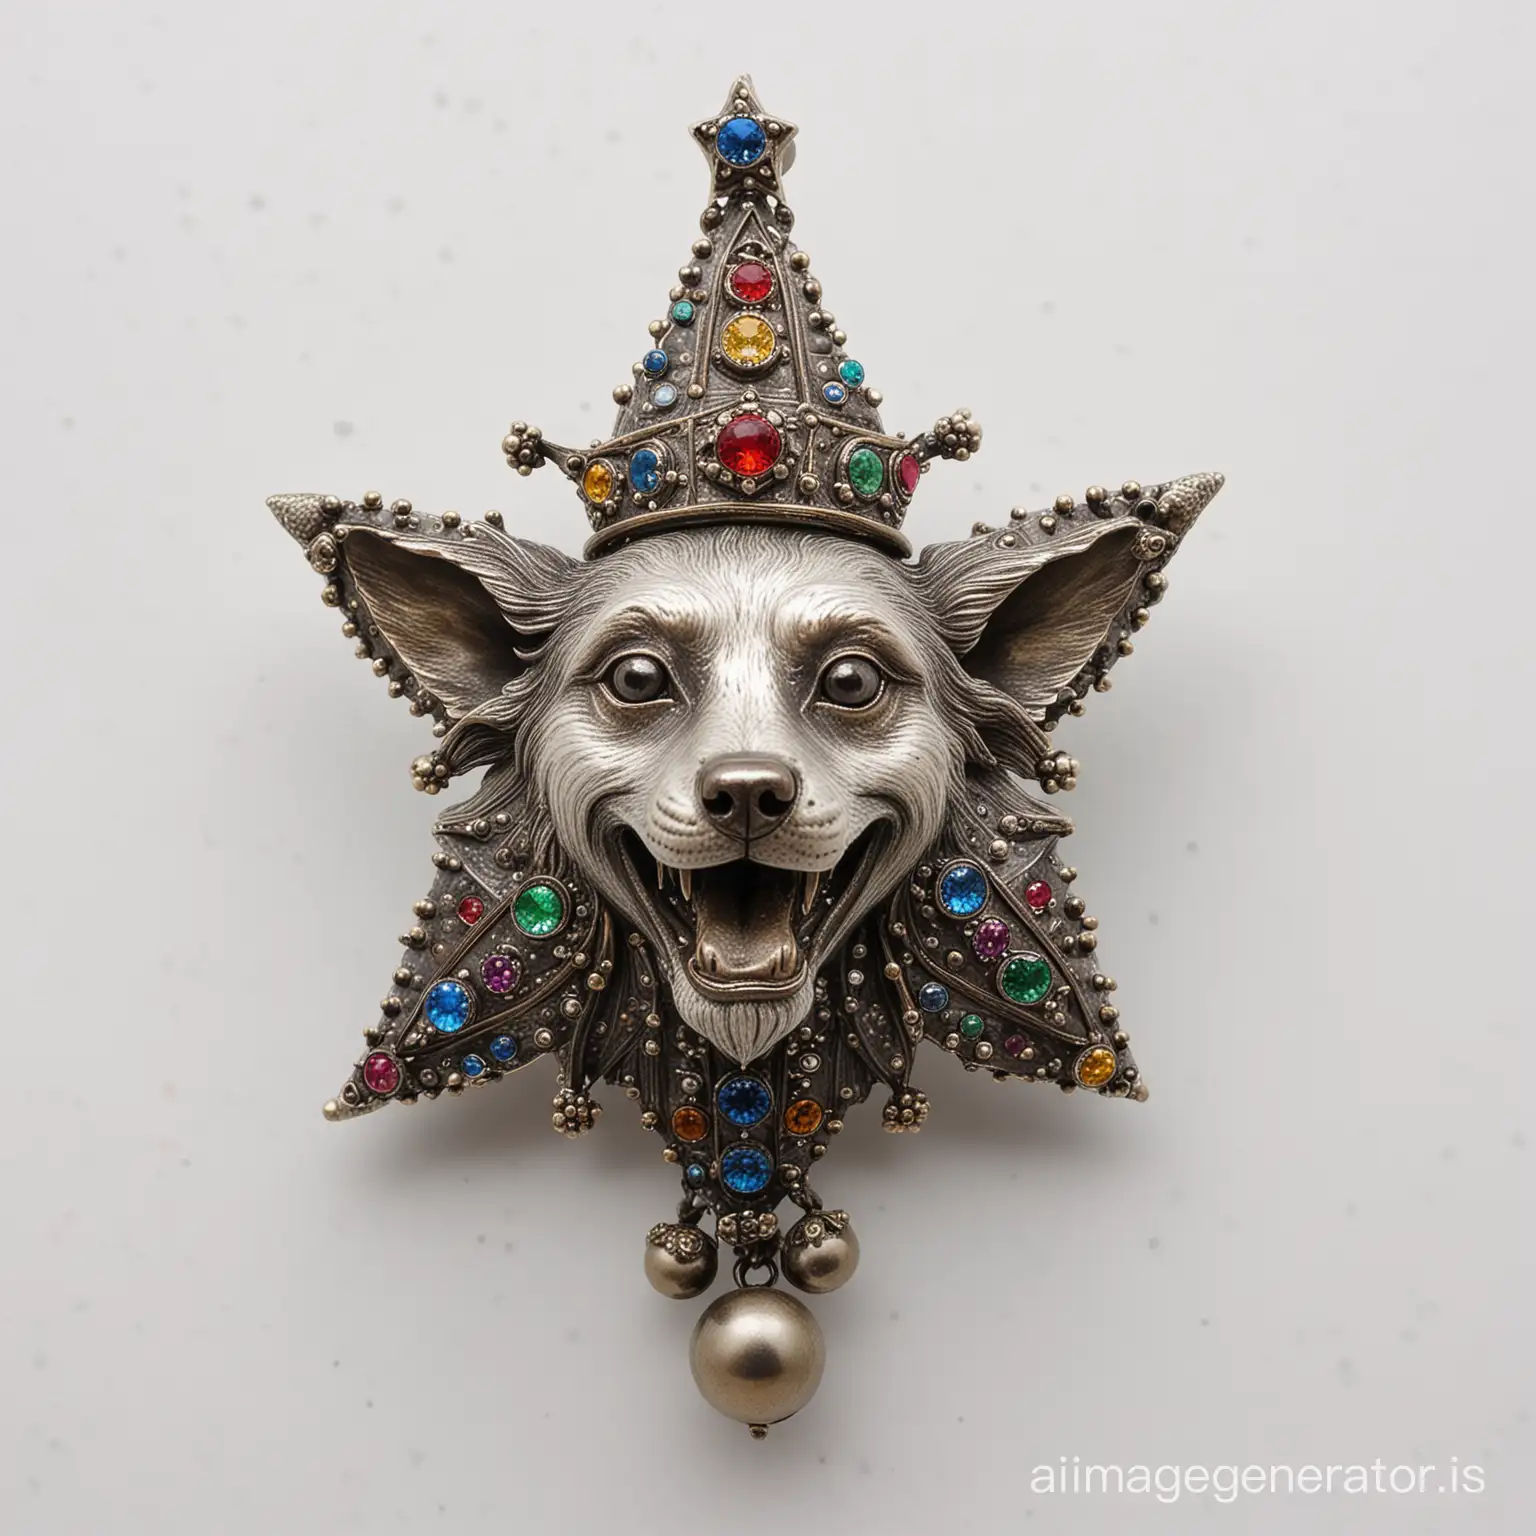 Hand crafted, Patinated, Bejewelled, medieval brooch featuring a crazy dog's face wearing a jester's hat with bells, a star-shaped ruff, and fine royal jewels as king in old silver and bronze on a white background